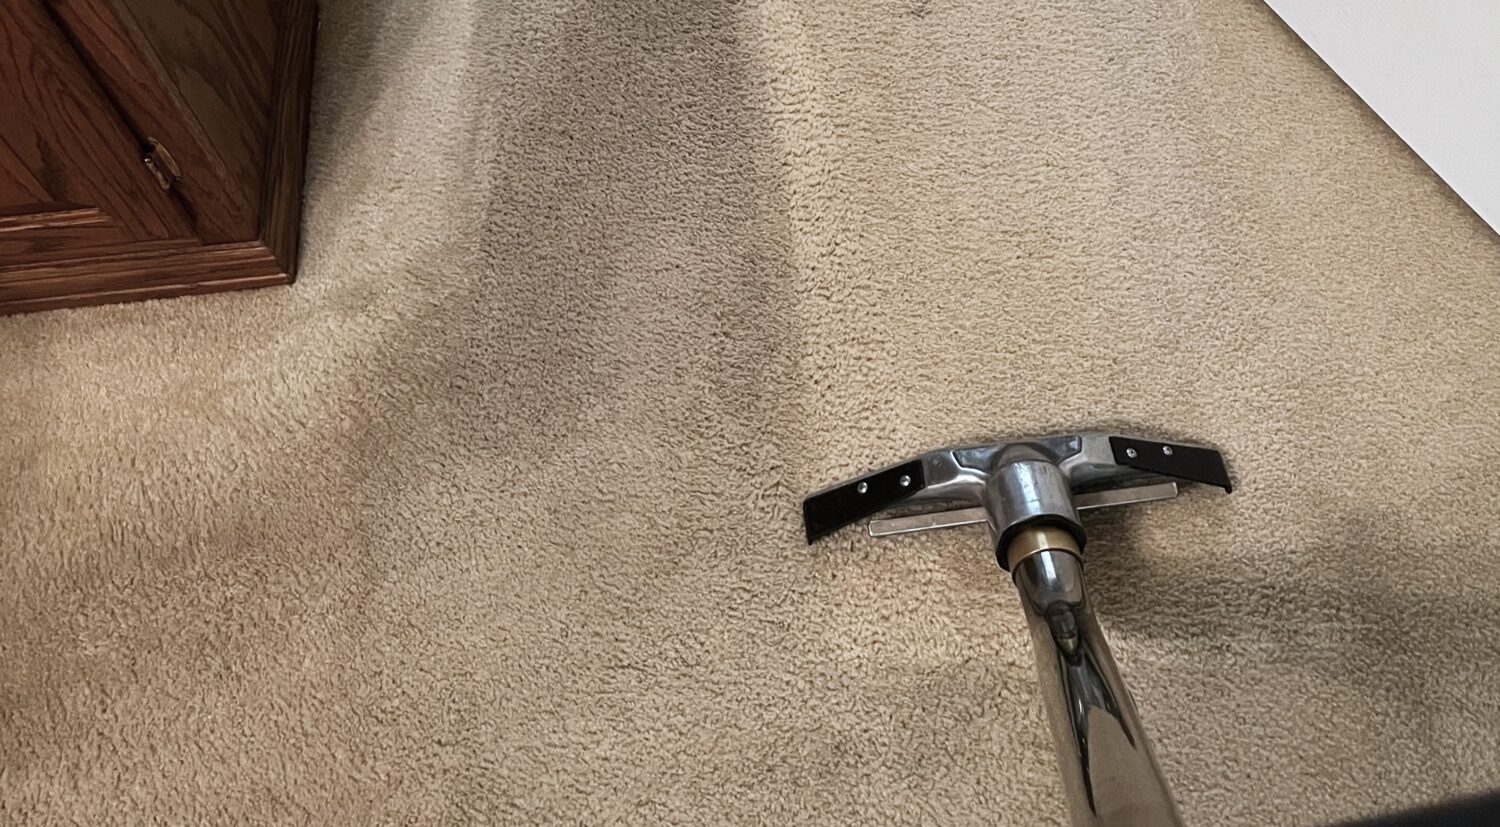 The traffic path in a carpet often needs the deepest clean.